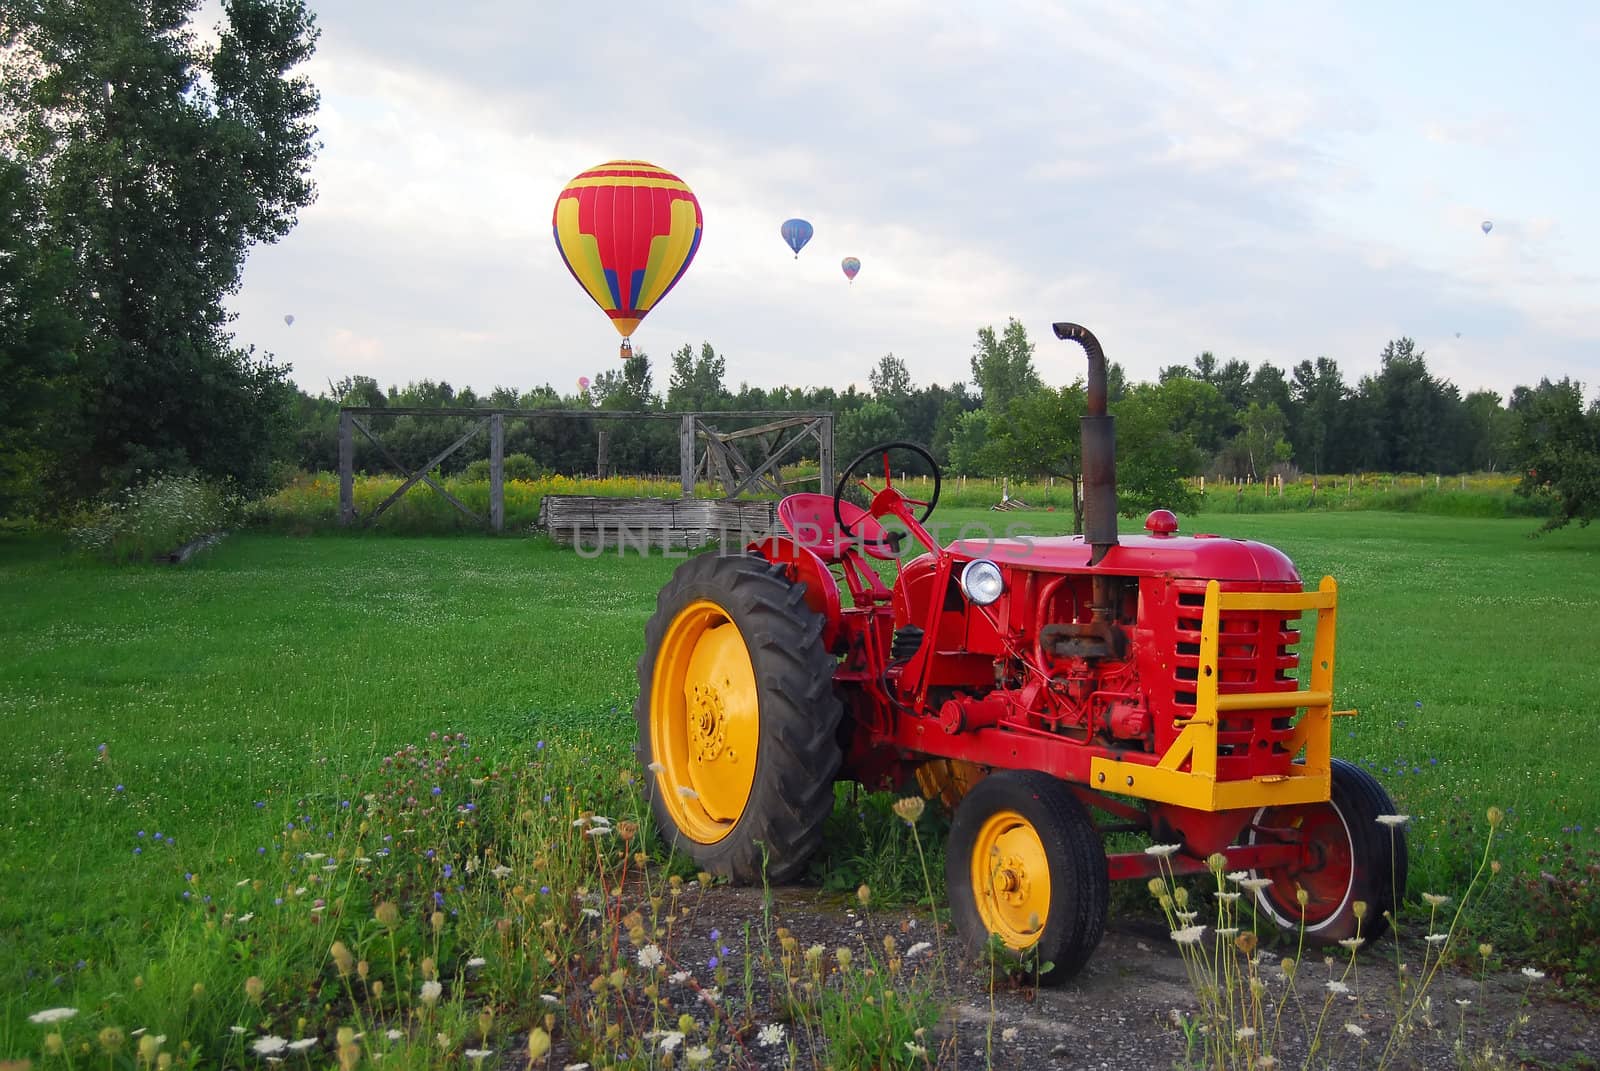 Hot Air Balloons over a field and an old tractor